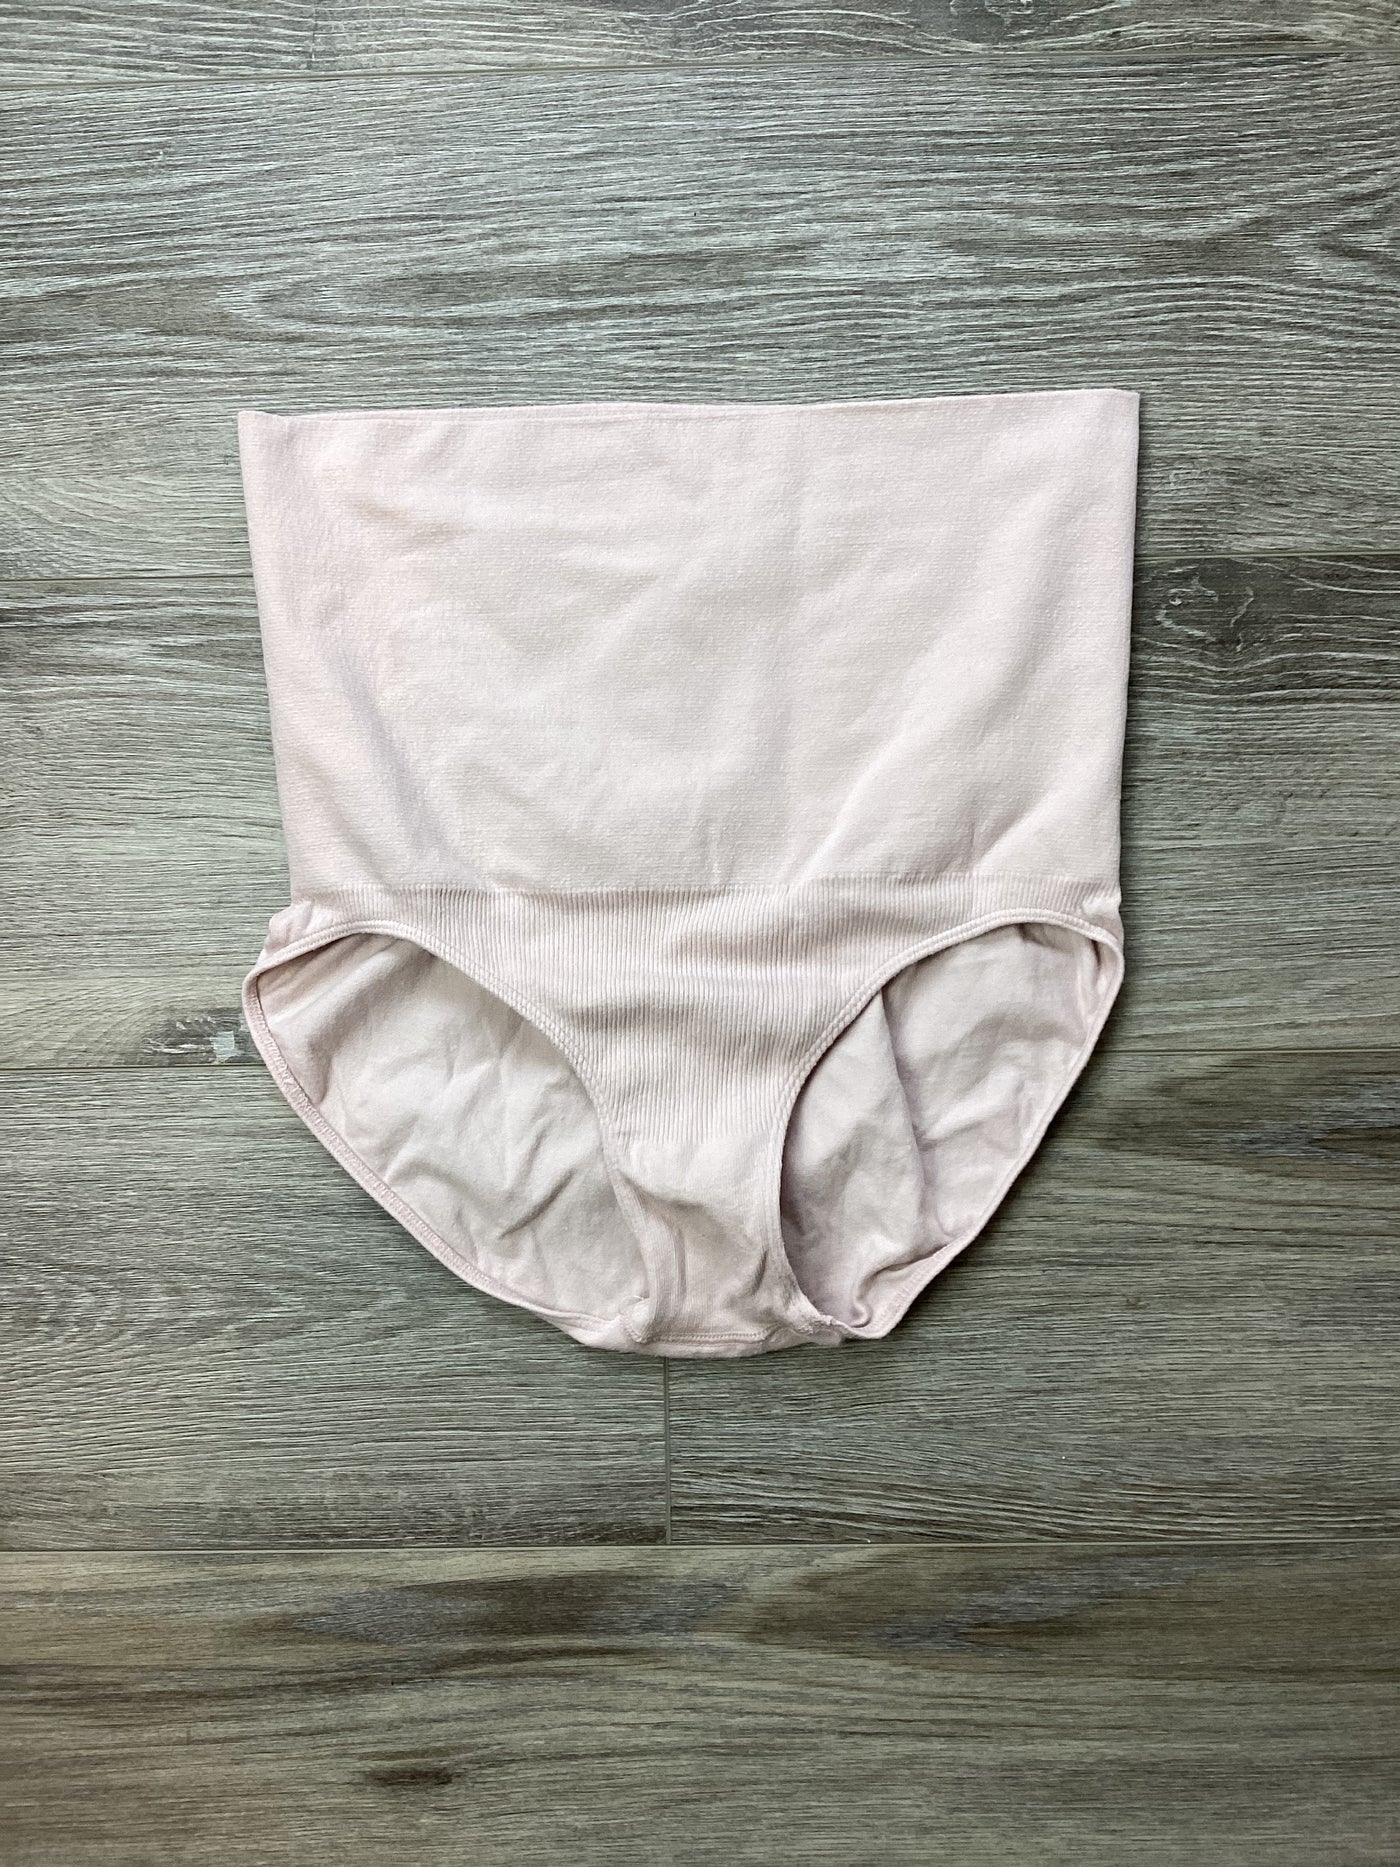 Seraphine post maternity shaping briefs in blush - Size M (Approx UK 10/12)